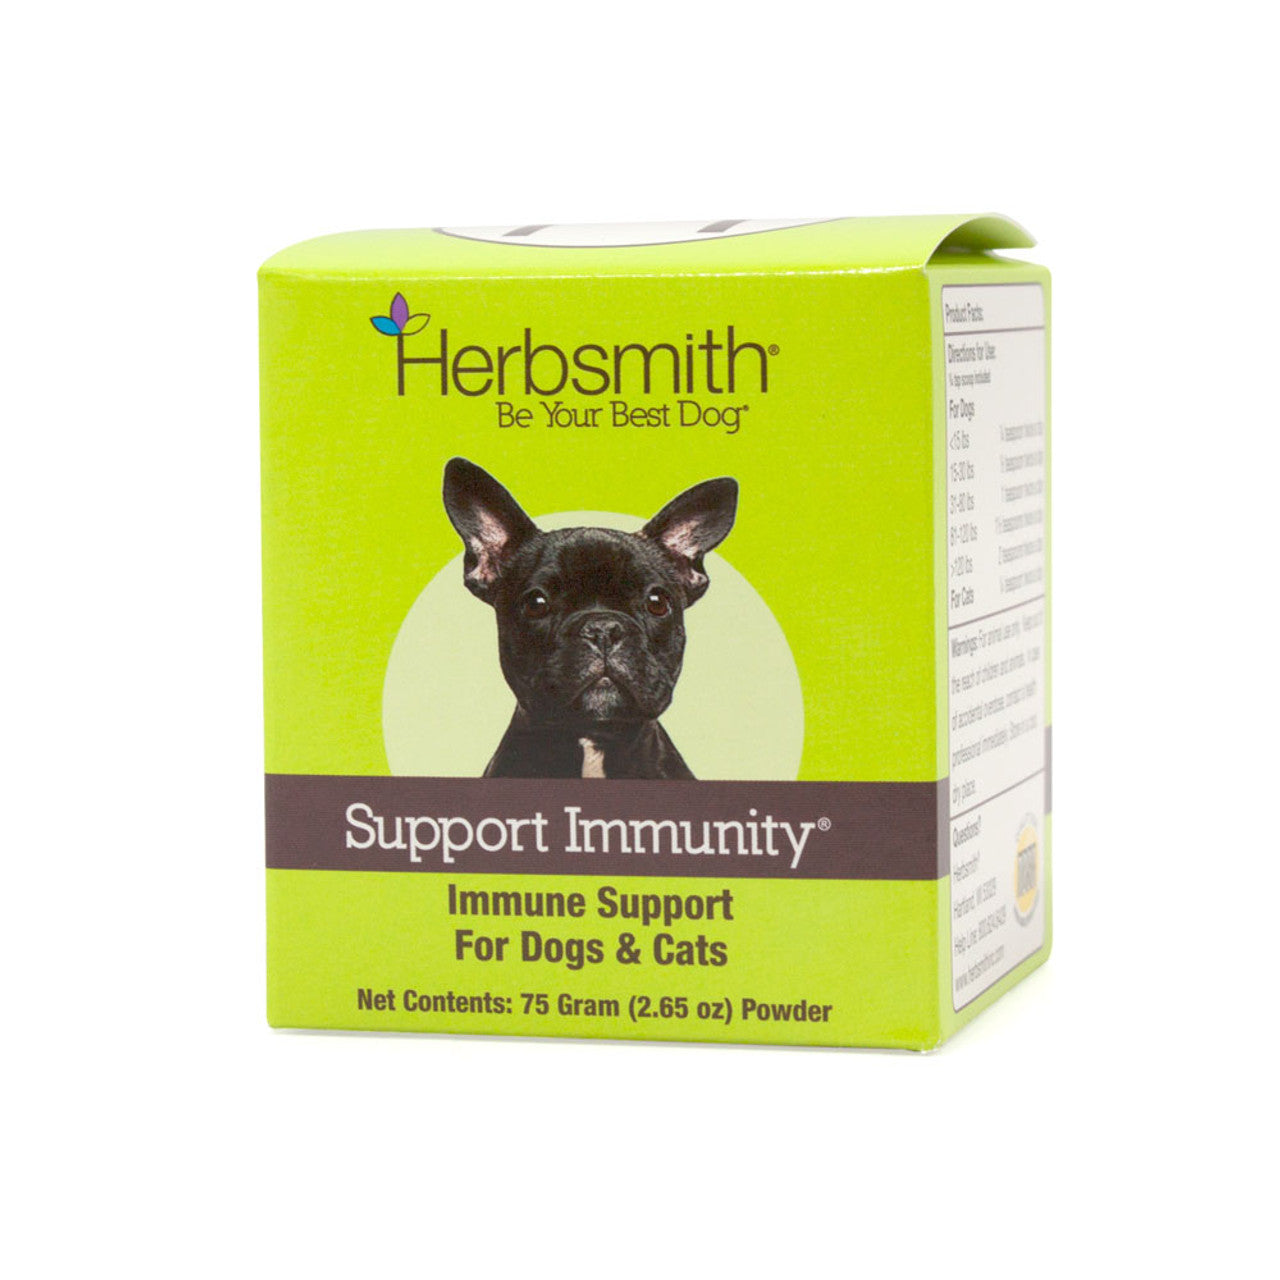 Herbsmith Support Immunity for Dogs & Cats 75g Powder - Paw Naturals